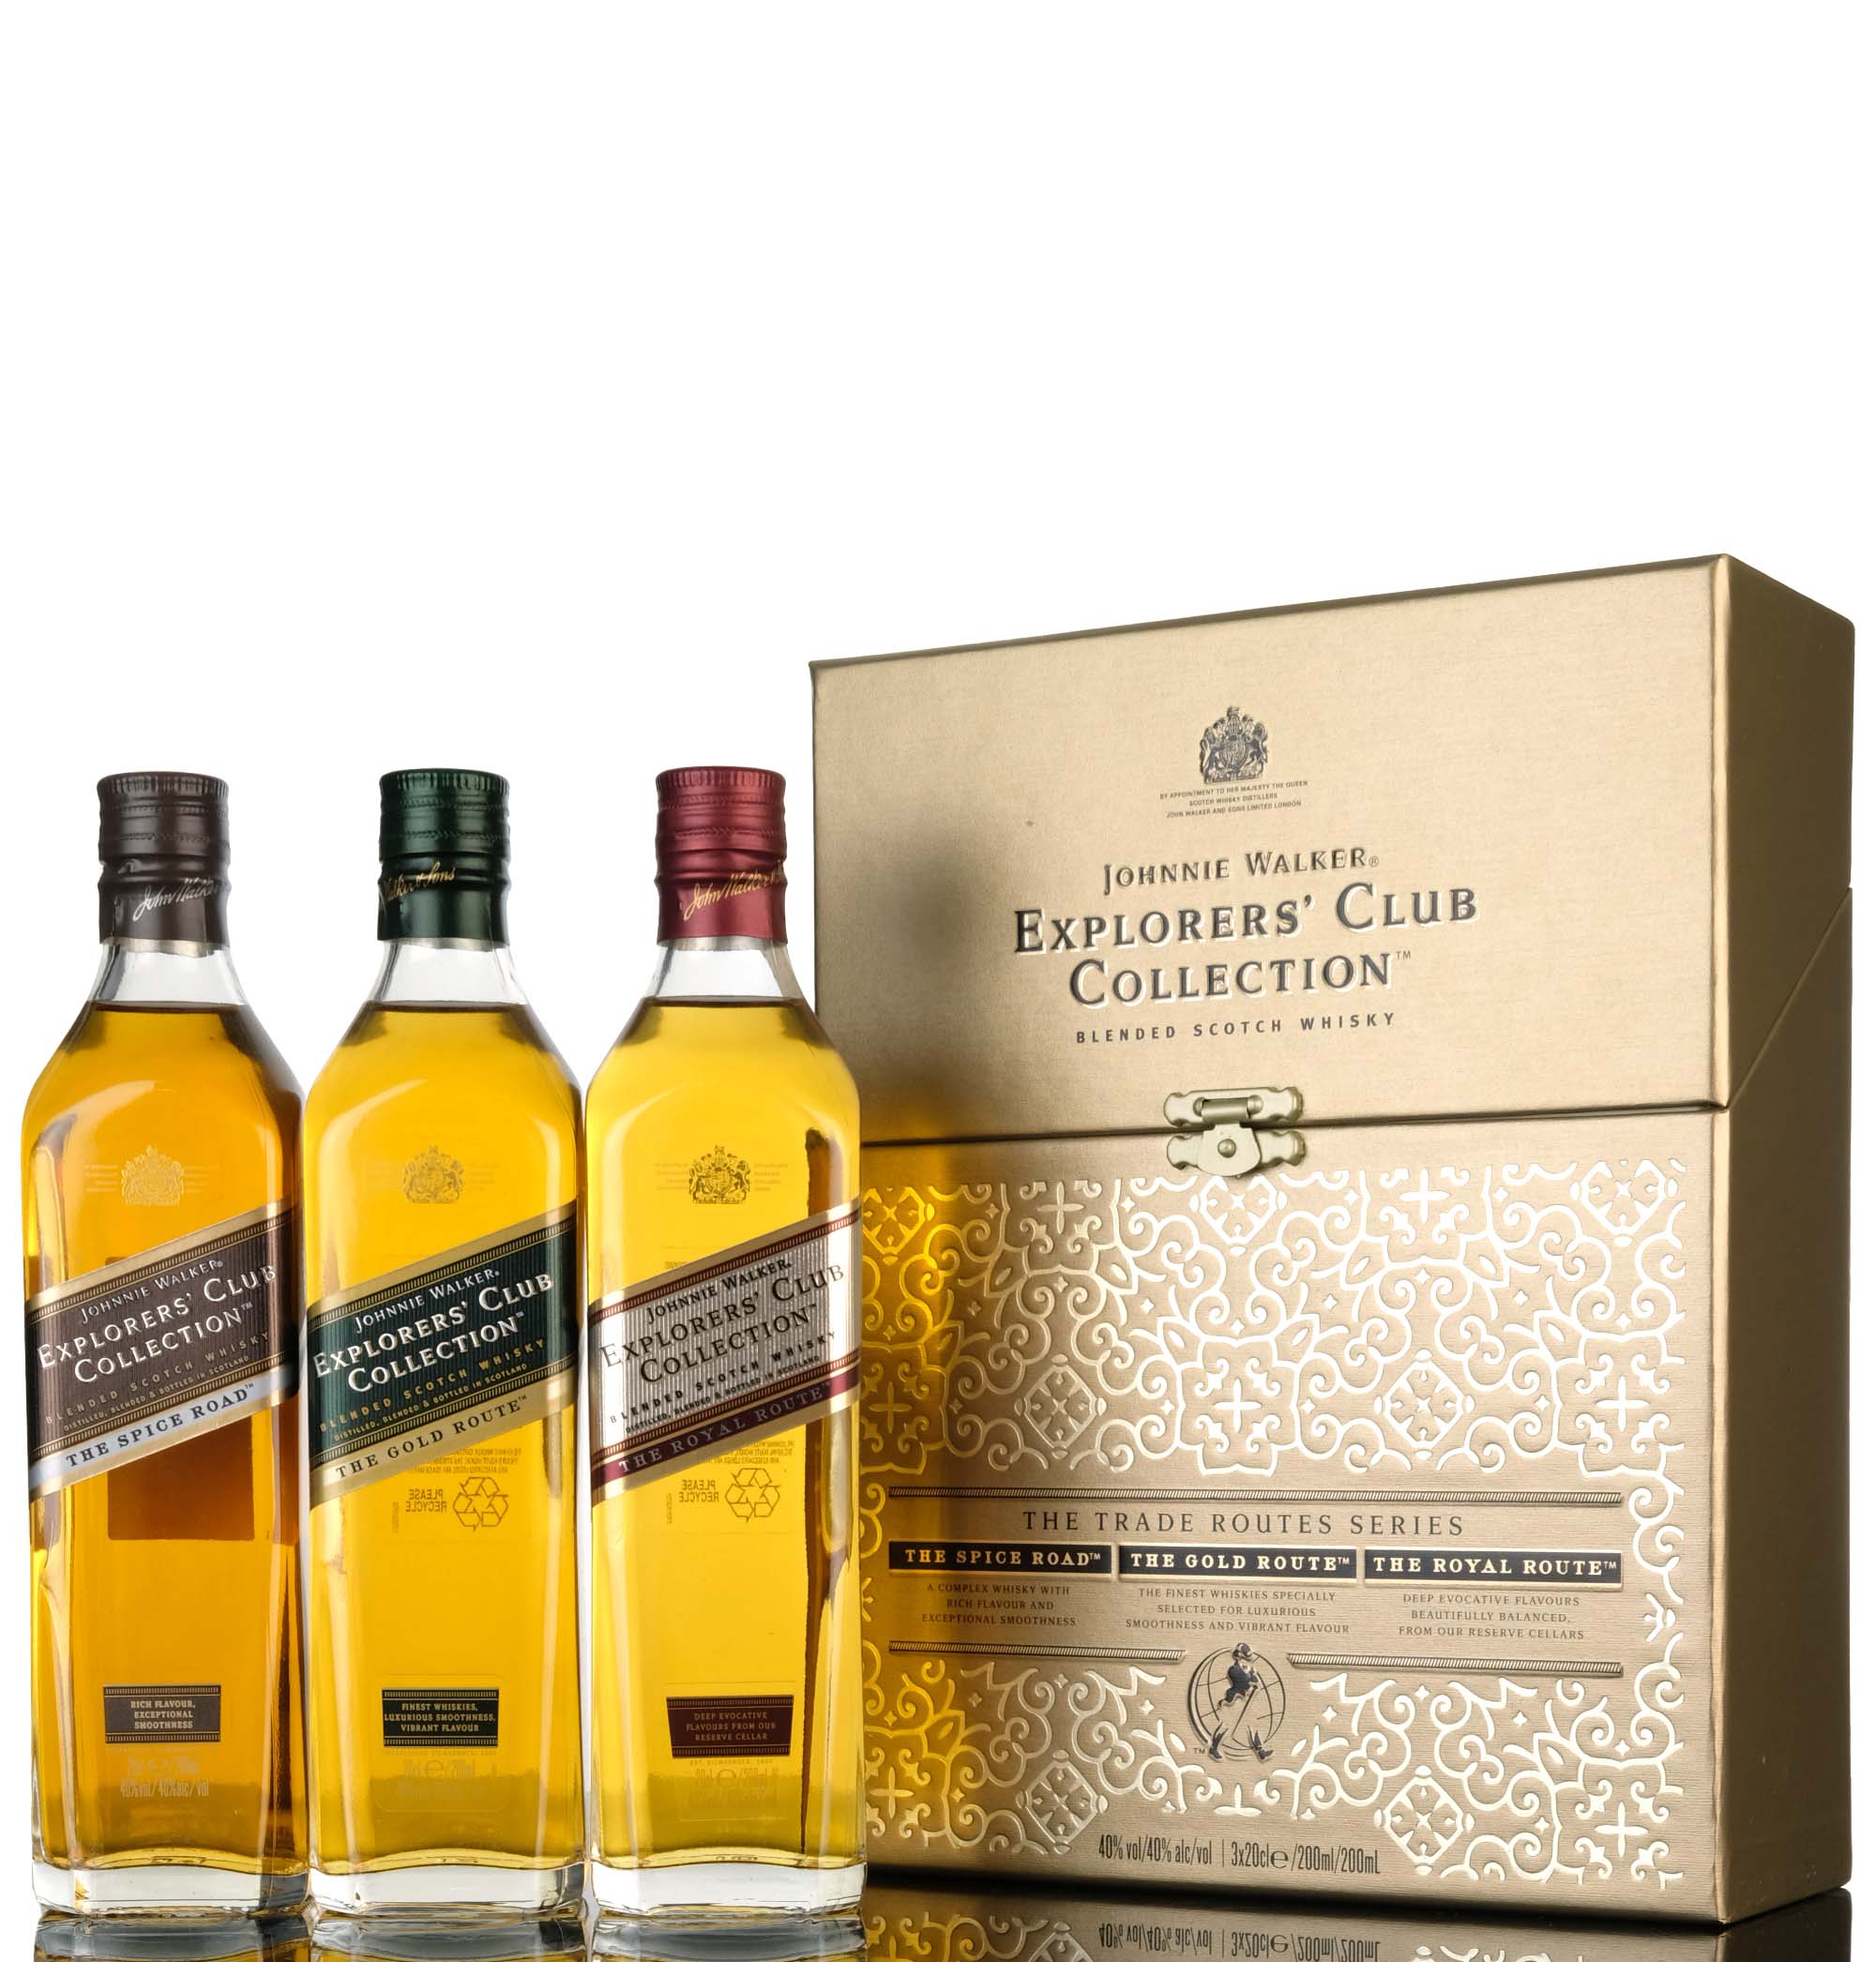 Johnnie Walker Explorers Club Collection - The Trade Route Series - Box Set Quarter Bottle